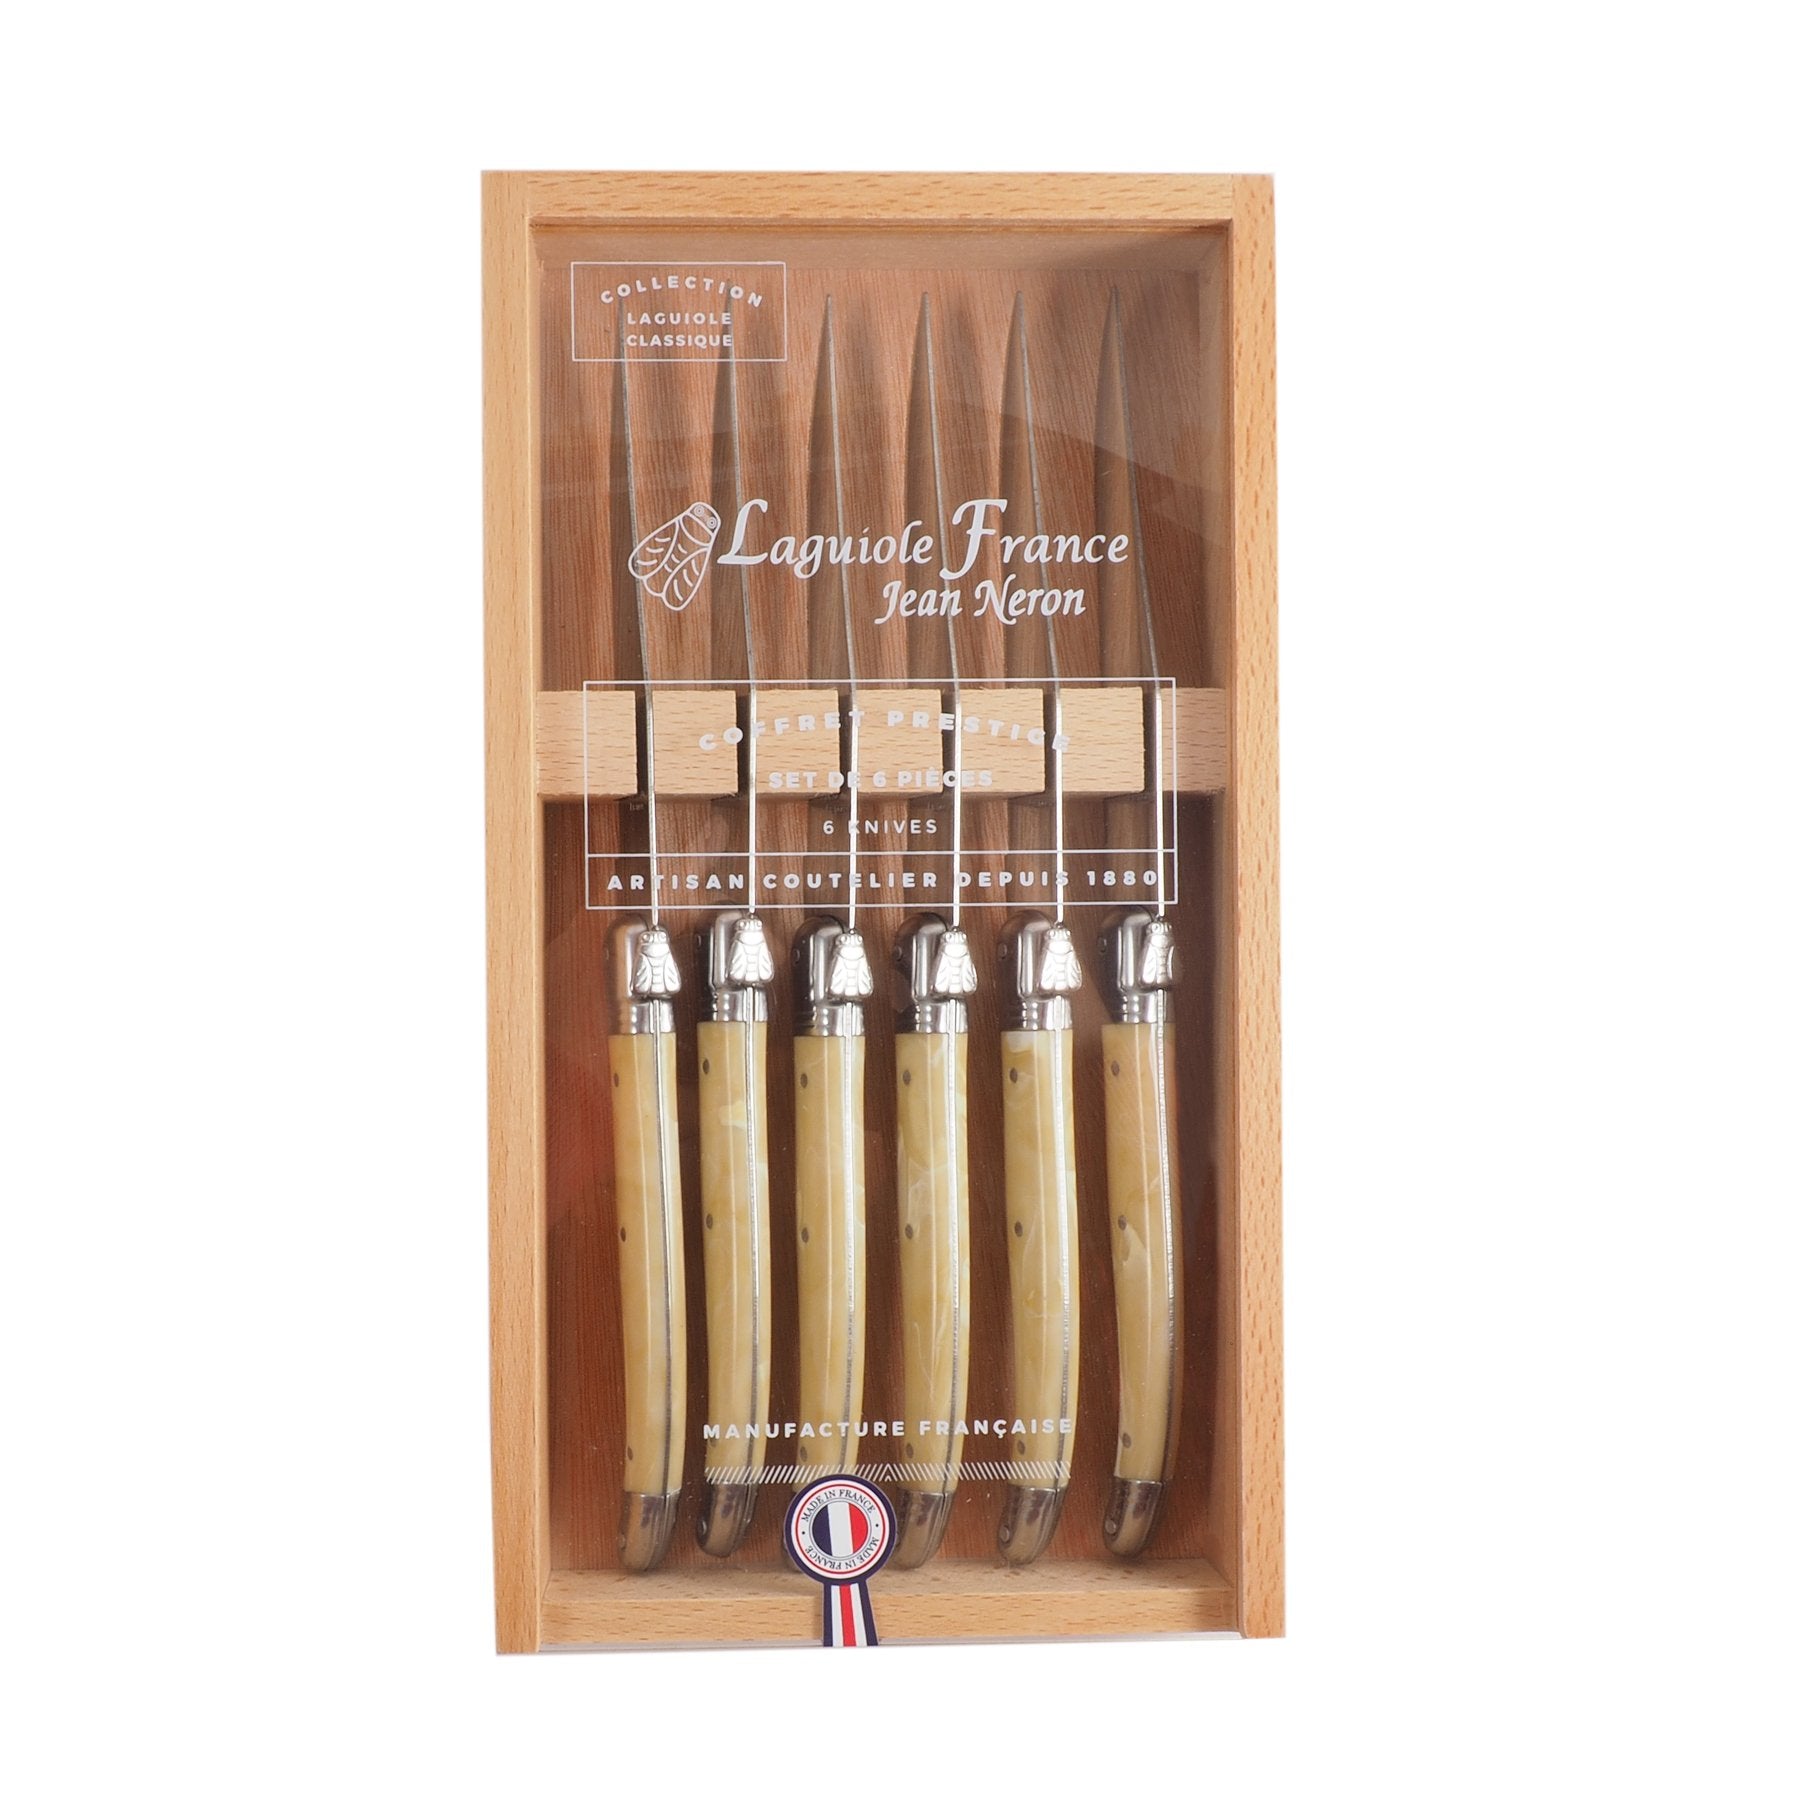 Laguiole 6 Piece Pale Horn Knife Set in Wooden Box - French Dry Goods